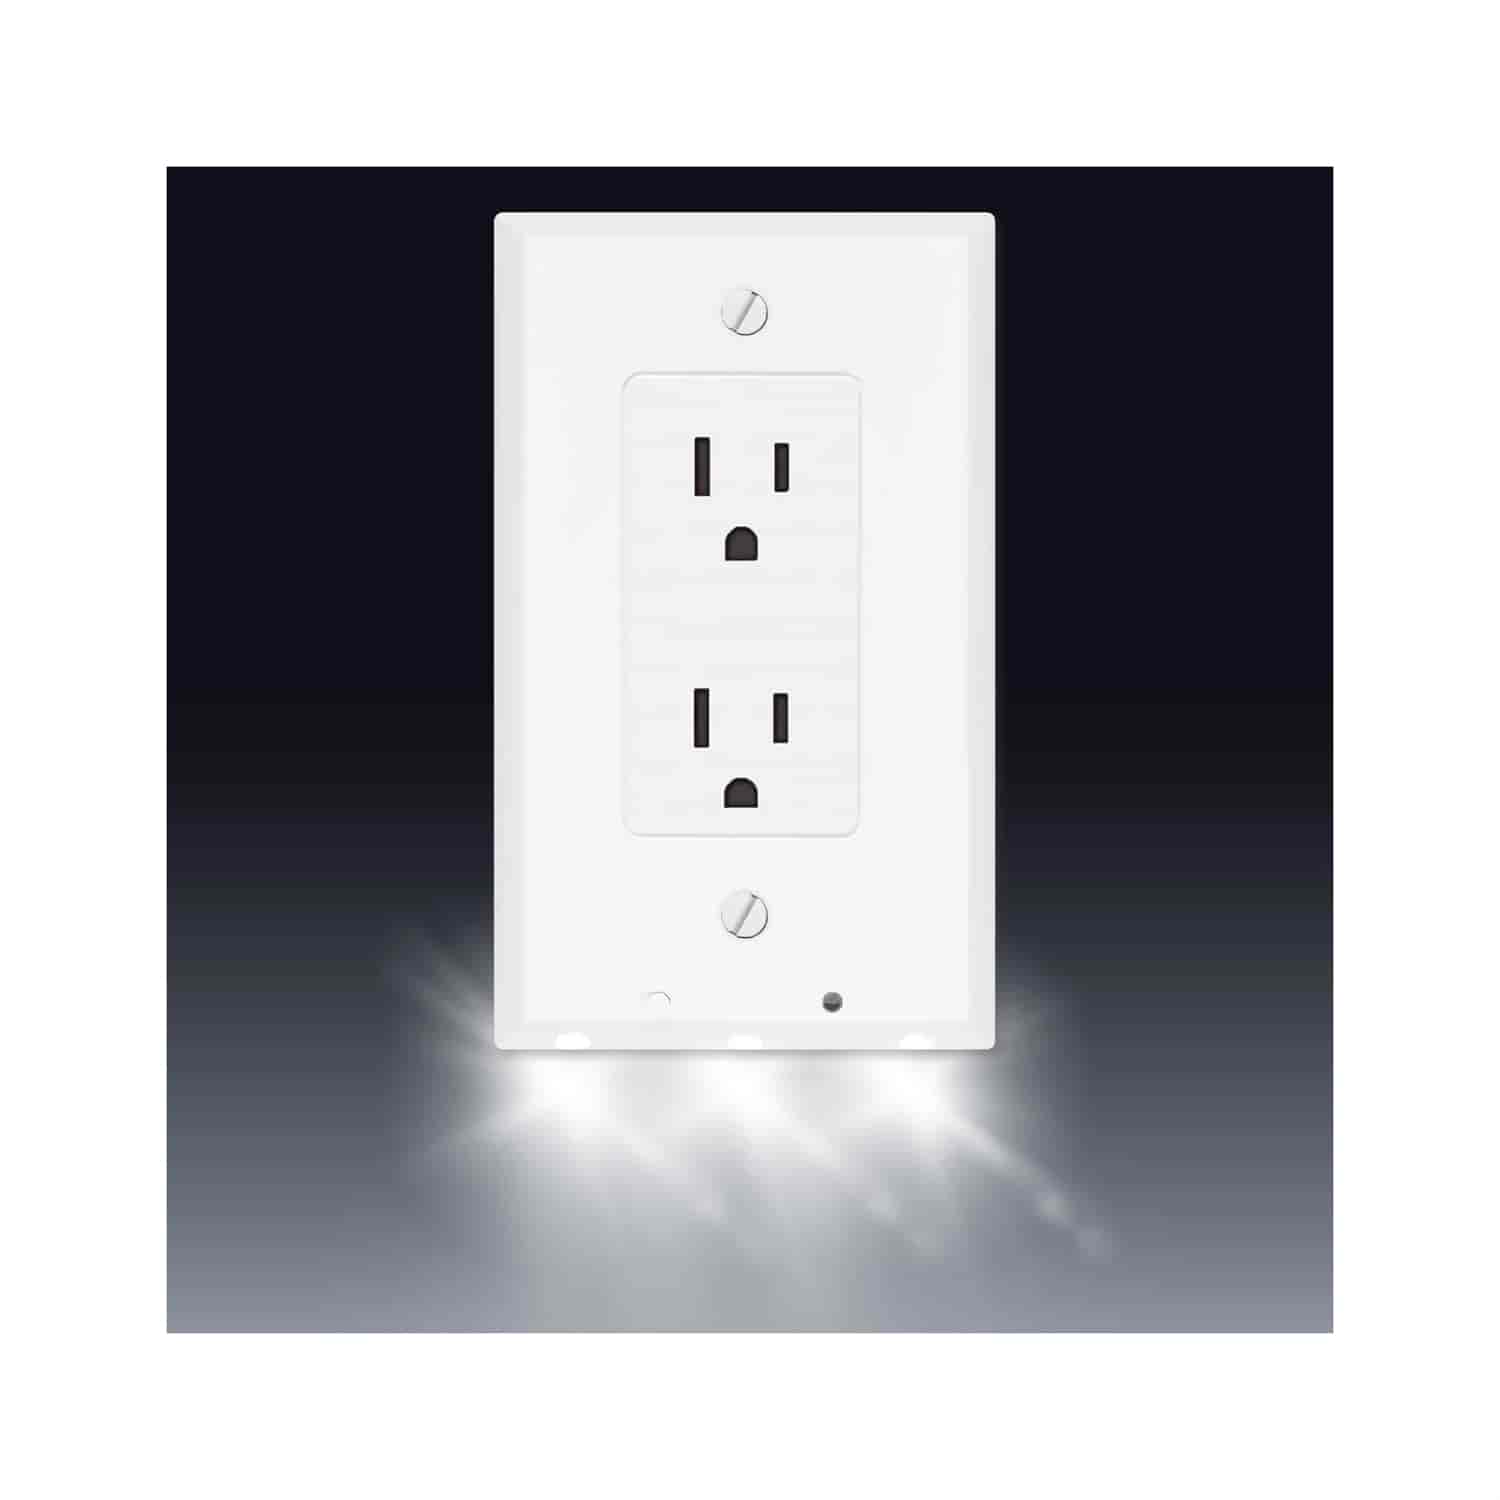 LED OUTLET COVER PLATE